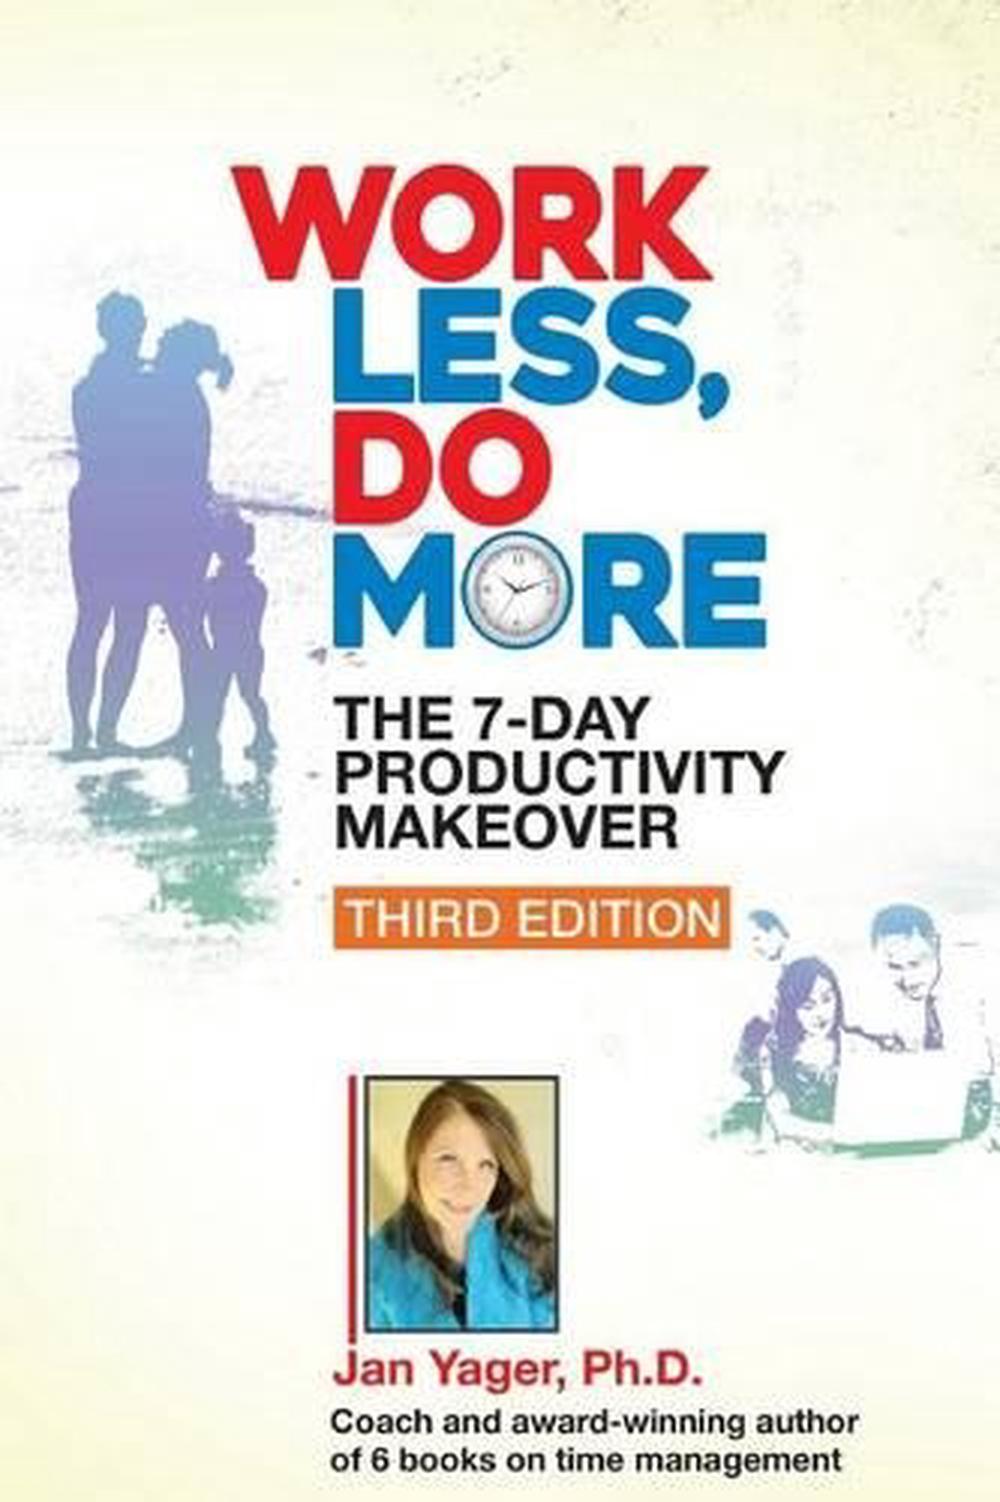 Work Less, Do More The 7Day Productivity Makeover by Jan Yager